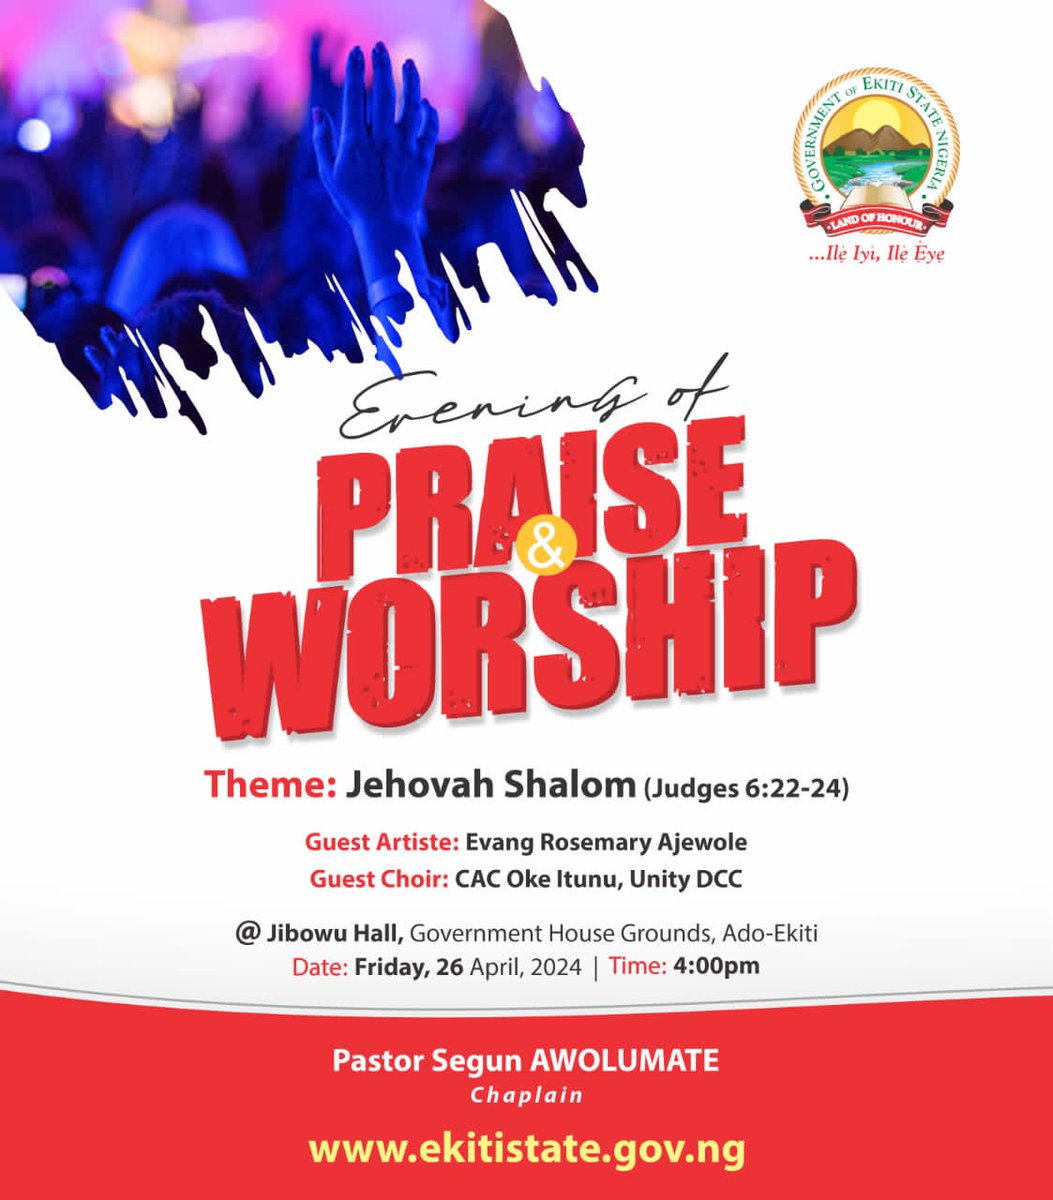 Join us later this evening as we raise our voices to God in praises.